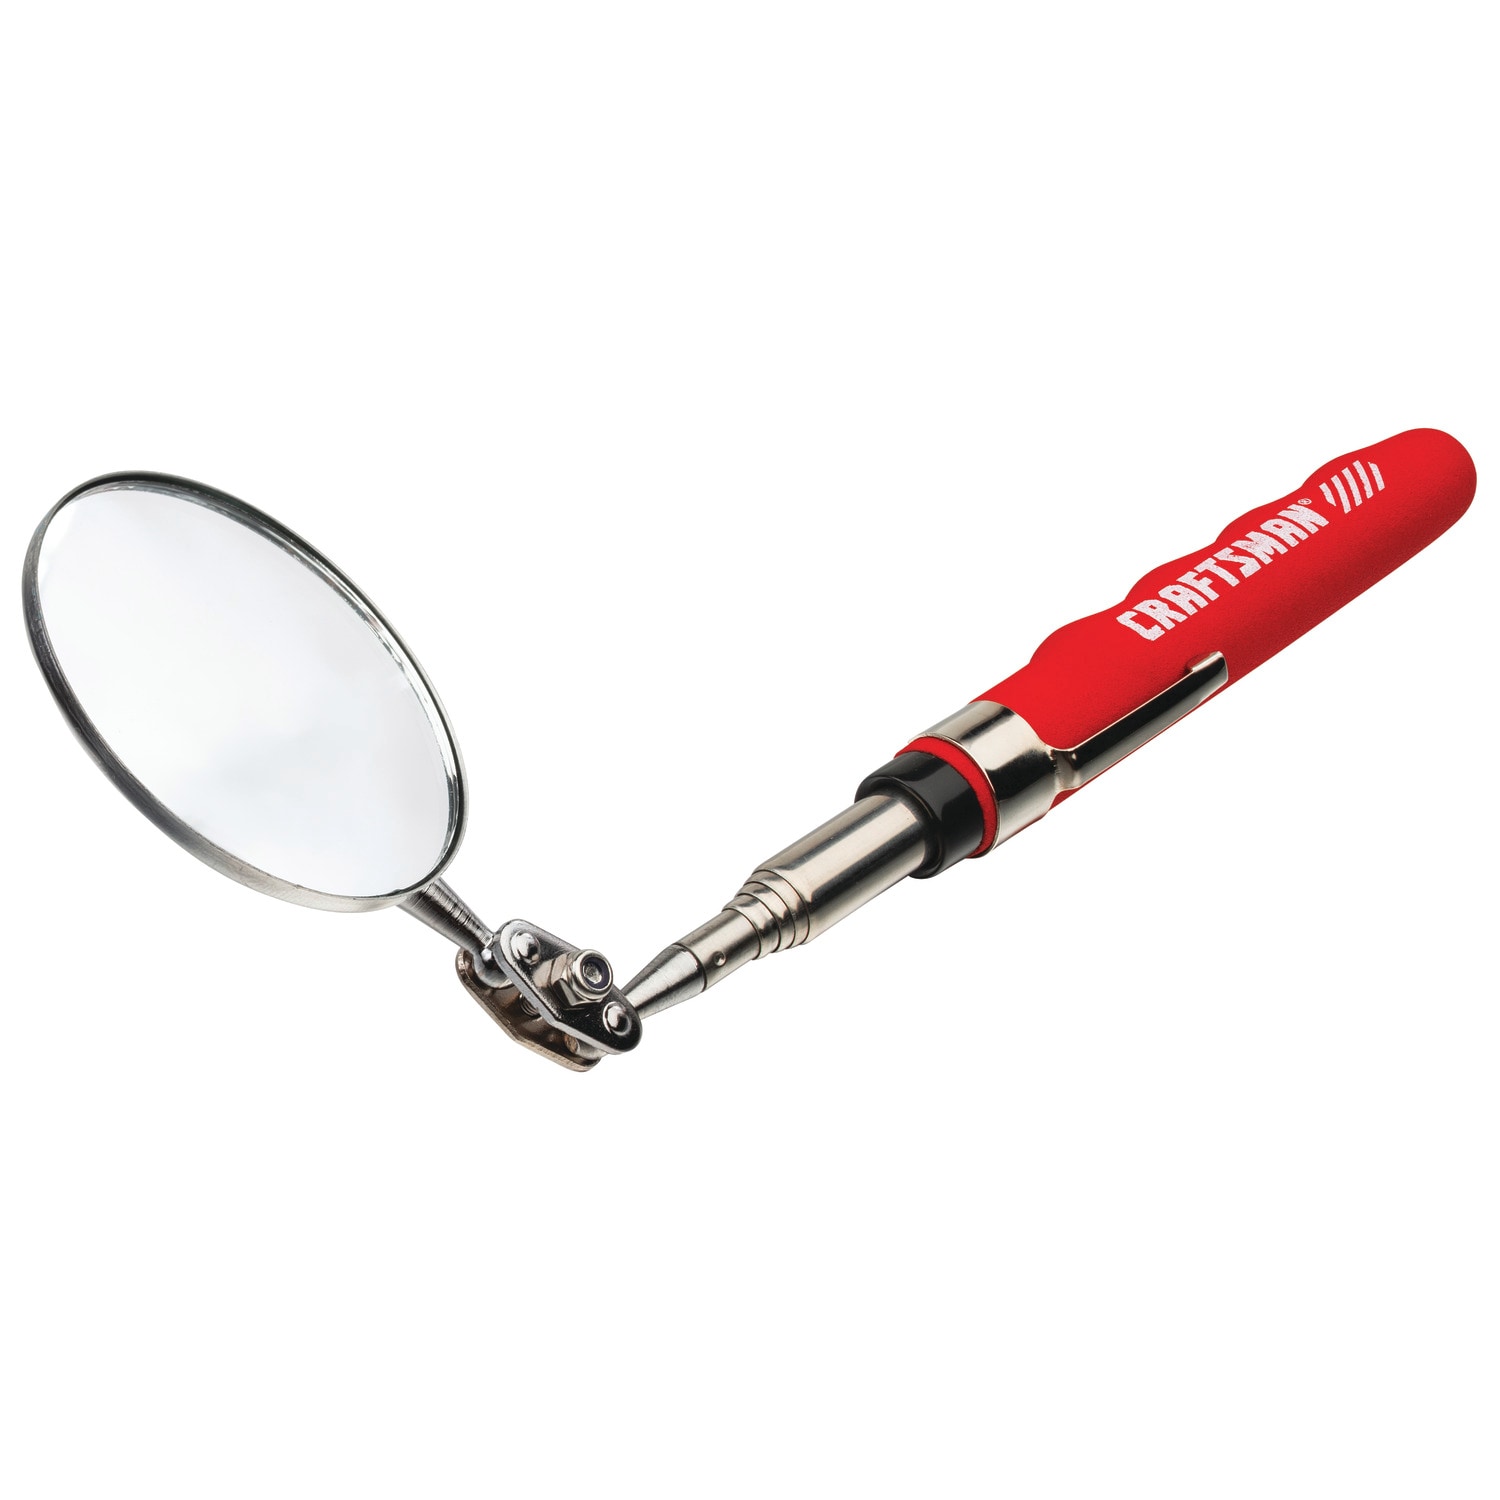 Windshield Repair Glass Inspection Mirror - 3x Magnification